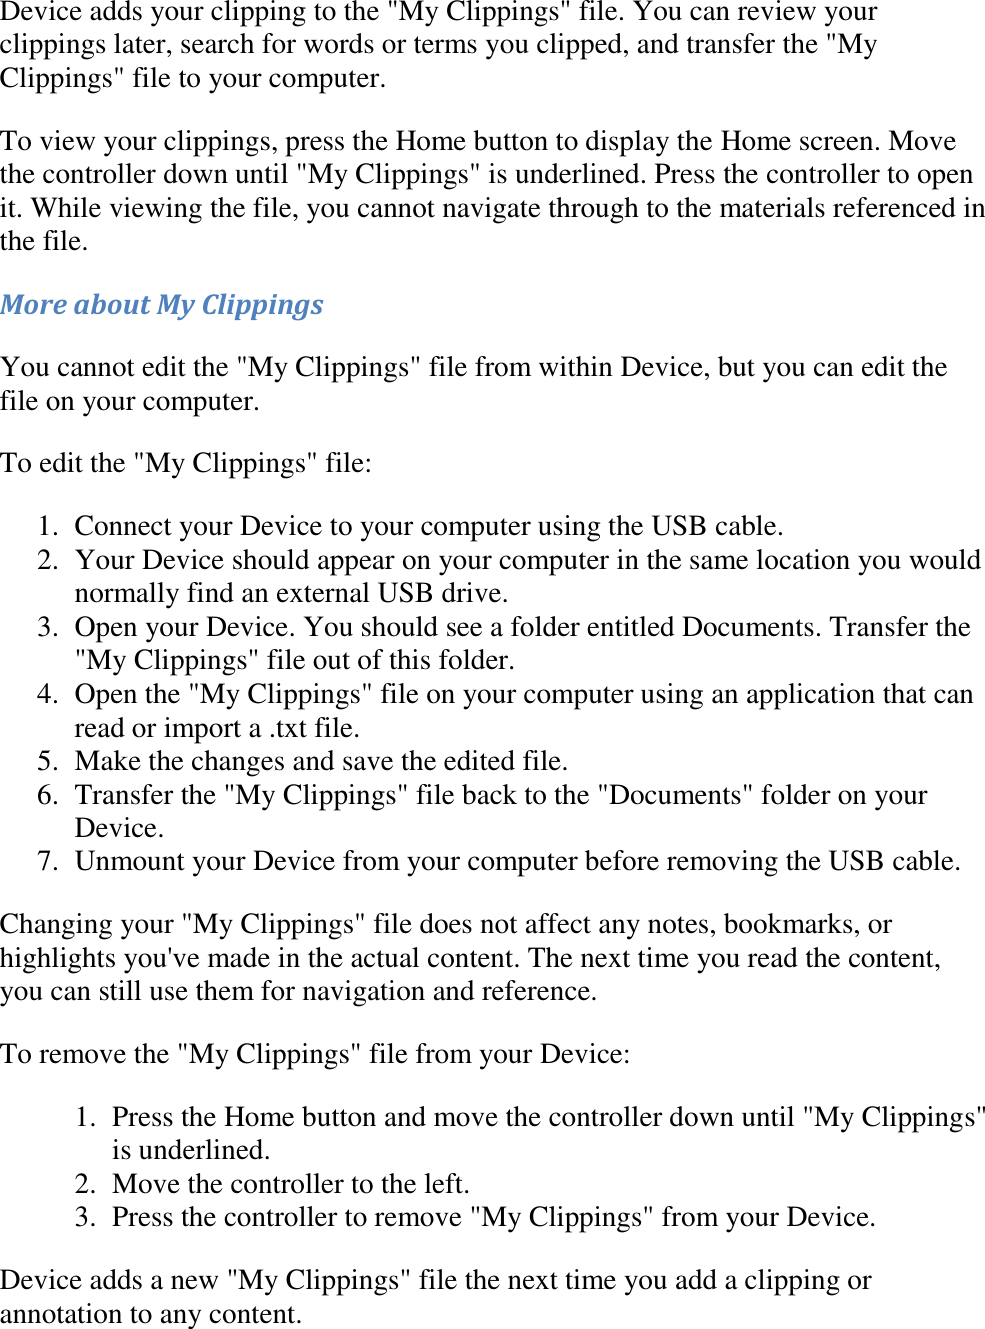   Device adds your clipping to the &quot;My Clippings&quot; file. You can review your clippings later, search for words or terms you clipped, and transfer the &quot;My Clippings&quot; file to your computer. To view your clippings, press the Home button to display the Home screen. Move the controller down until &quot;My Clippings&quot; is underlined. Press the controller to open it. While viewing the file, you cannot navigate through to the materials referenced in the file. More about My Clippings You cannot edit the &quot;My Clippings&quot; file from within Device, but you can edit the file on your computer. To edit the &quot;My Clippings&quot; file: 1. Connect your Device to your computer using the USB cable.  2. Your Device should appear on your computer in the same location you would normally find an external USB drive.  3. Open your Device. You should see a folder entitled Documents. Transfer the &quot;My Clippings&quot; file out of this folder.  4. Open the &quot;My Clippings&quot; file on your computer using an application that can read or import a .txt file.  5. Make the changes and save the edited file.  6. Transfer the &quot;My Clippings&quot; file back to the &quot;Documents&quot; folder on your Device.  7. Unmount your Device from your computer before removing the USB cable.  Changing your &quot;My Clippings&quot; file does not affect any notes, bookmarks, or highlights you&apos;ve made in the actual content. The next time you read the content, you can still use them for navigation and reference. To remove the &quot;My Clippings&quot; file from your Device: 1. Press the Home button and move the controller down until &quot;My Clippings&quot; is underlined.  2. Move the controller to the left.  3. Press the controller to remove &quot;My Clippings&quot; from your Device.  Device adds a new &quot;My Clippings&quot; file the next time you add a clipping or annotation to any content. 